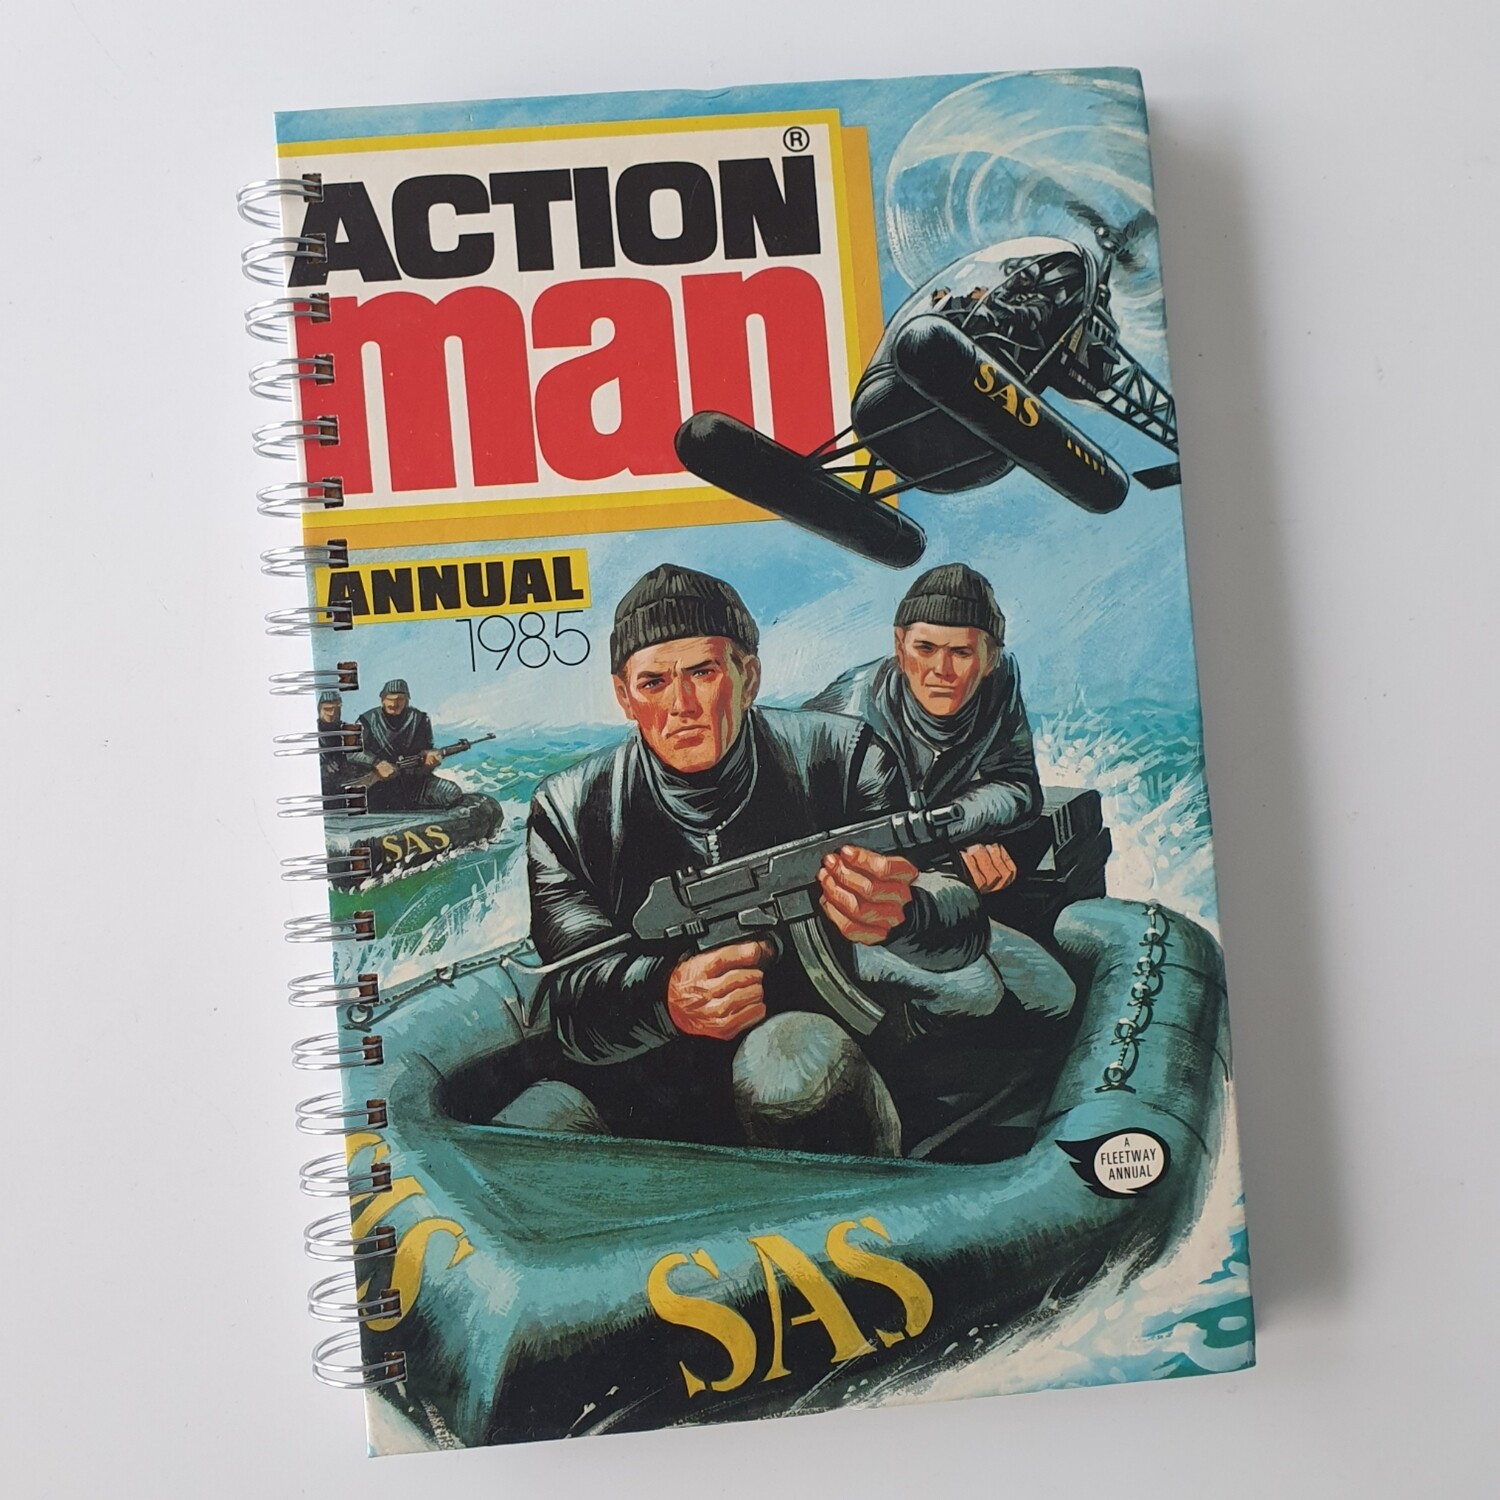 Action Man Annual 1985 plain paper Notebook